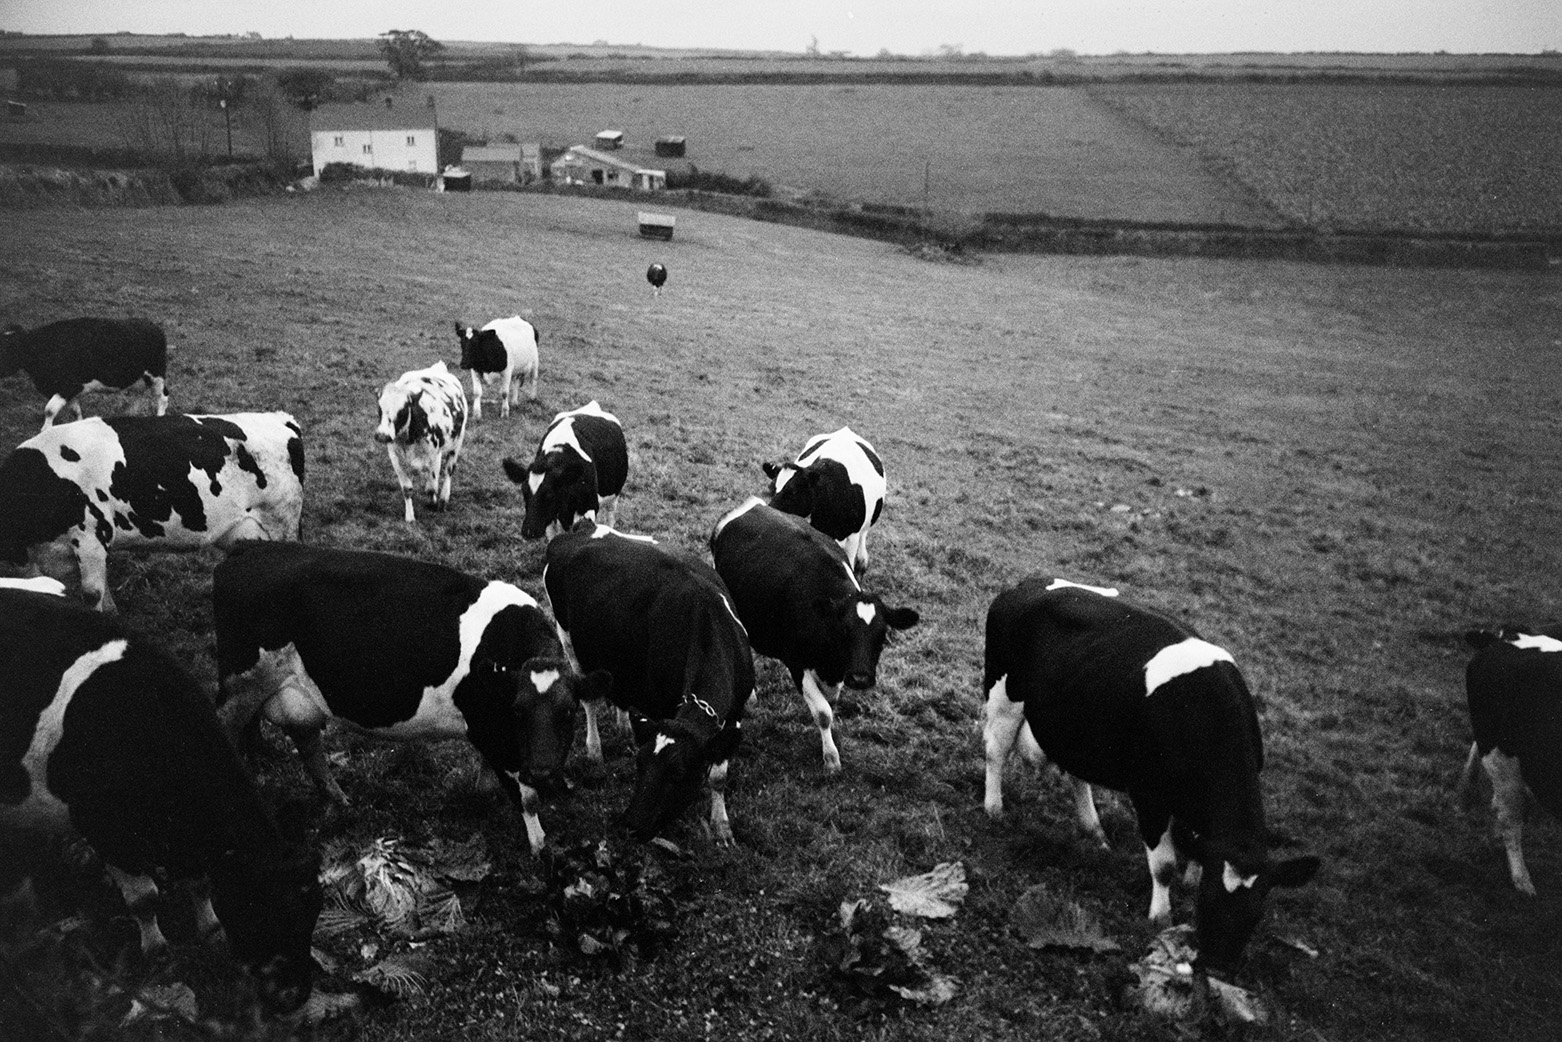 Cows eating flatpole cabbages in a field at Mill Road Farm, Beaford. Farm buildings can be seen in the background. The farm was also known as Jeffrys.